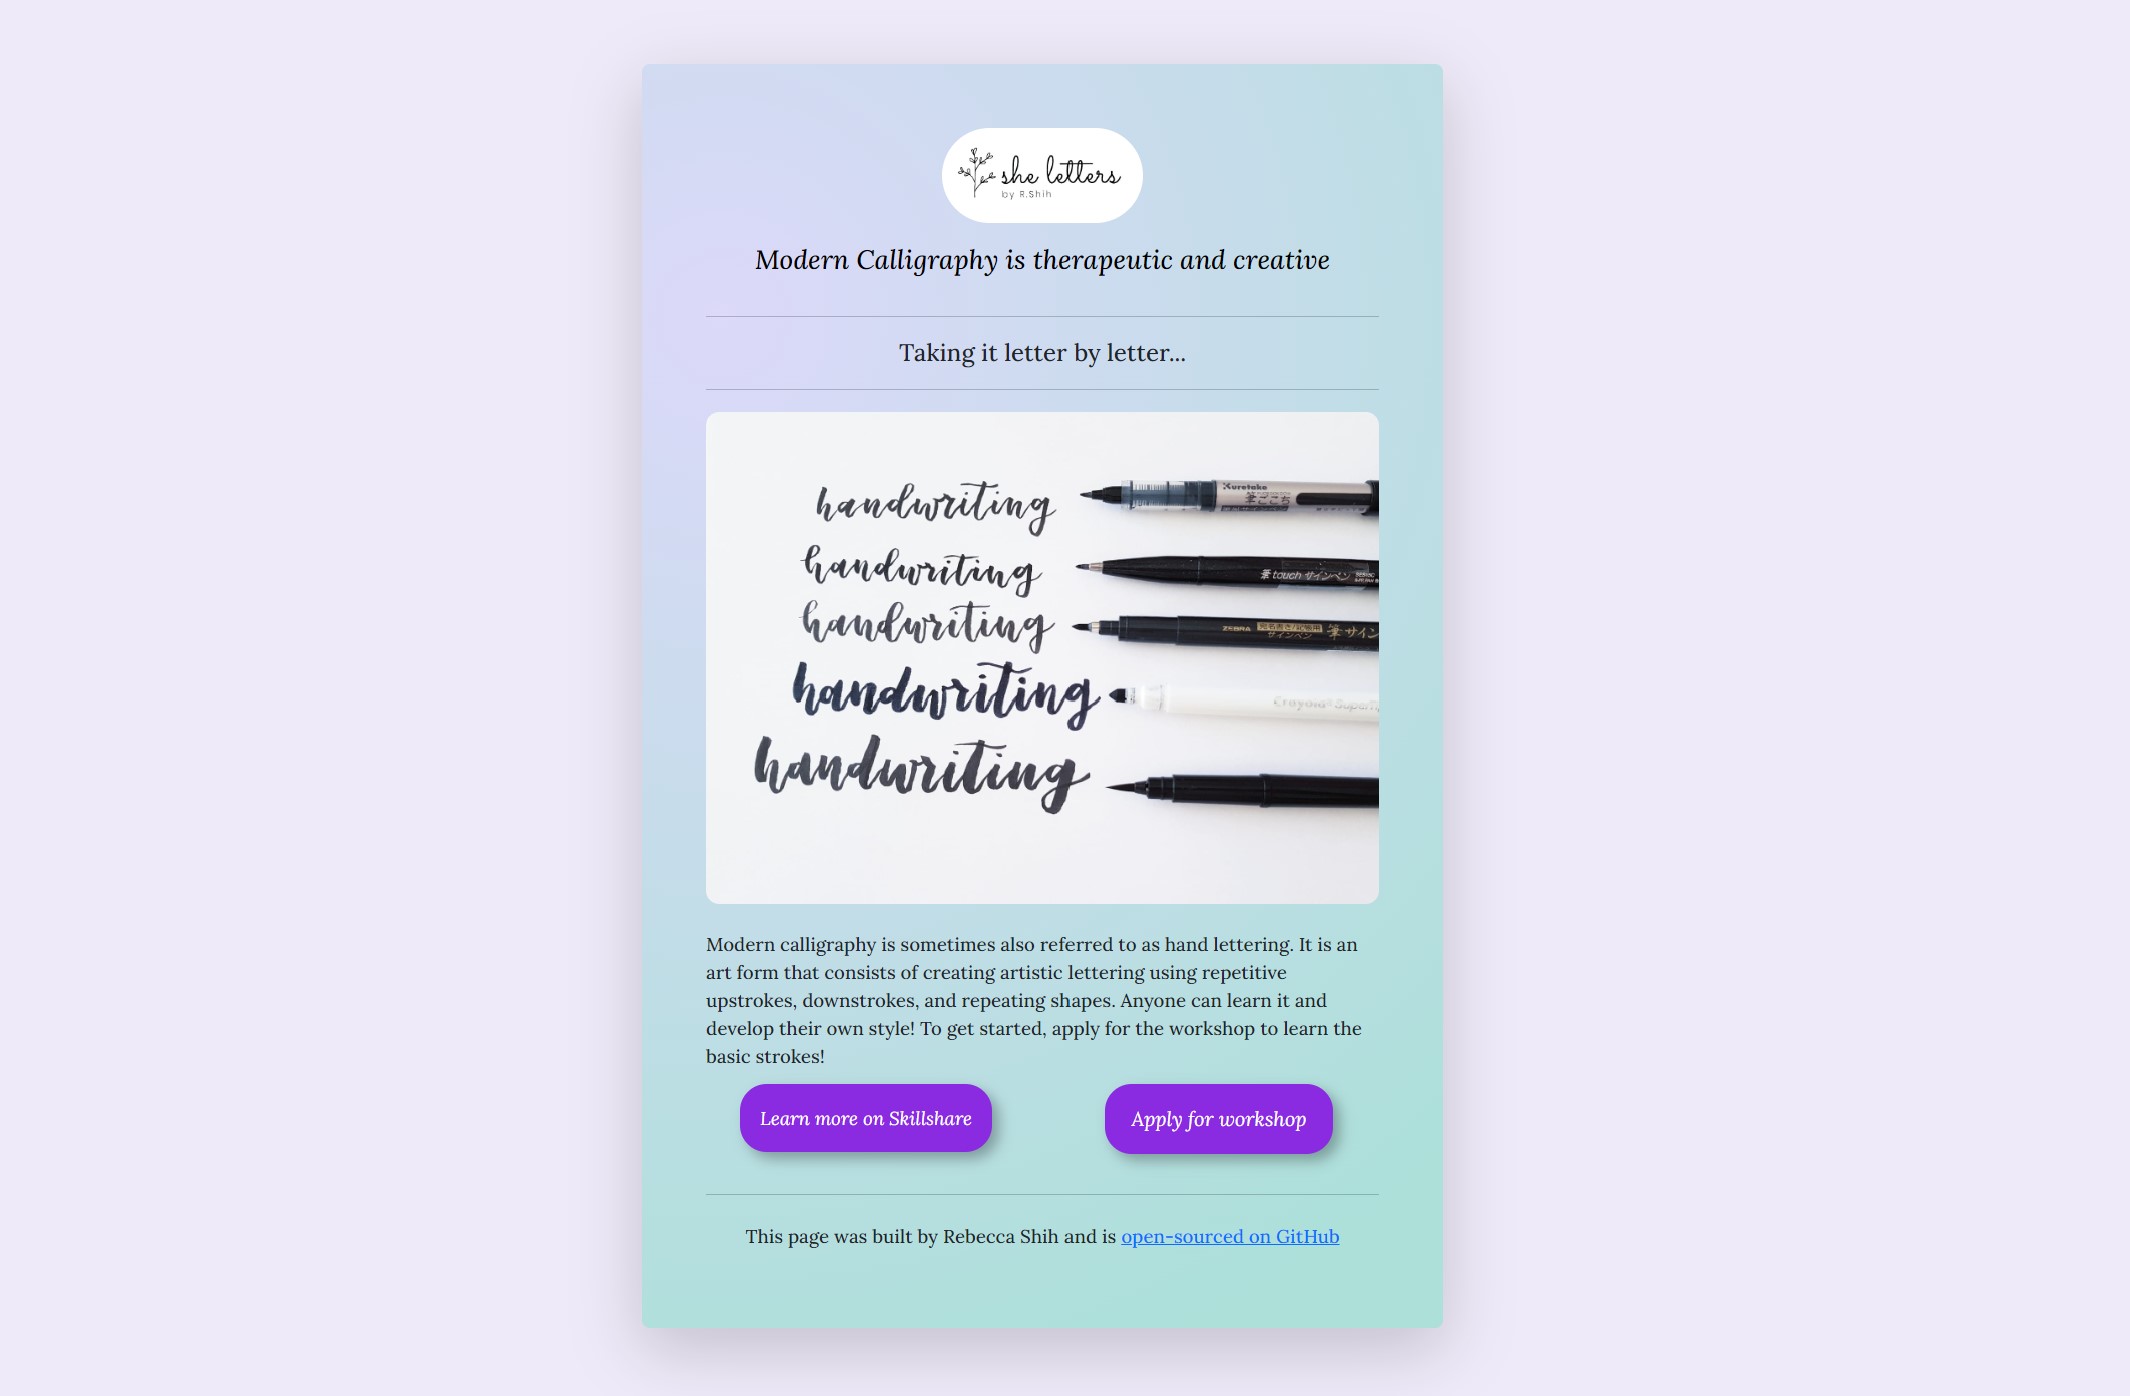 she-letters-landing-page